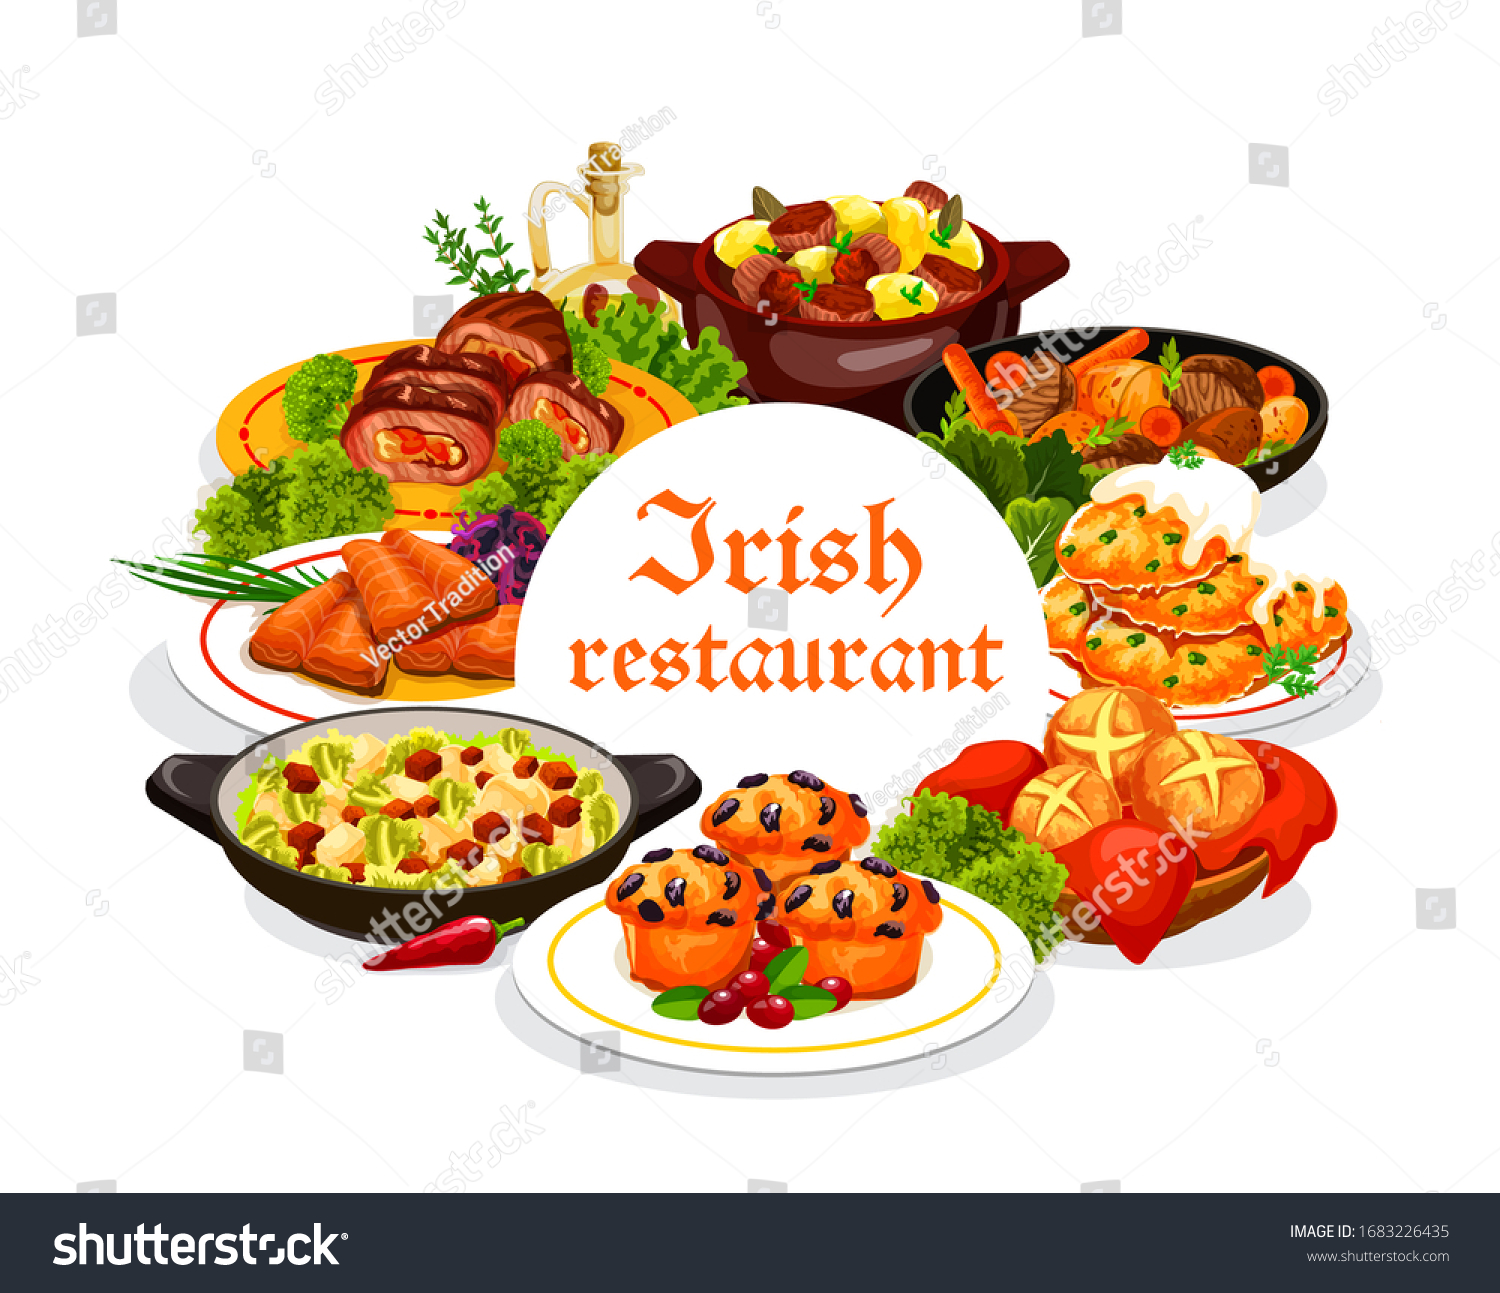 SVG of Irish restaurant food with vector dishes of vegetable, meat and fish with dessert. Irish stews with beef, rabbit and lamb, potato pancakes and colcannon, salmon, cabbage salad, soda bread and cupcakes svg